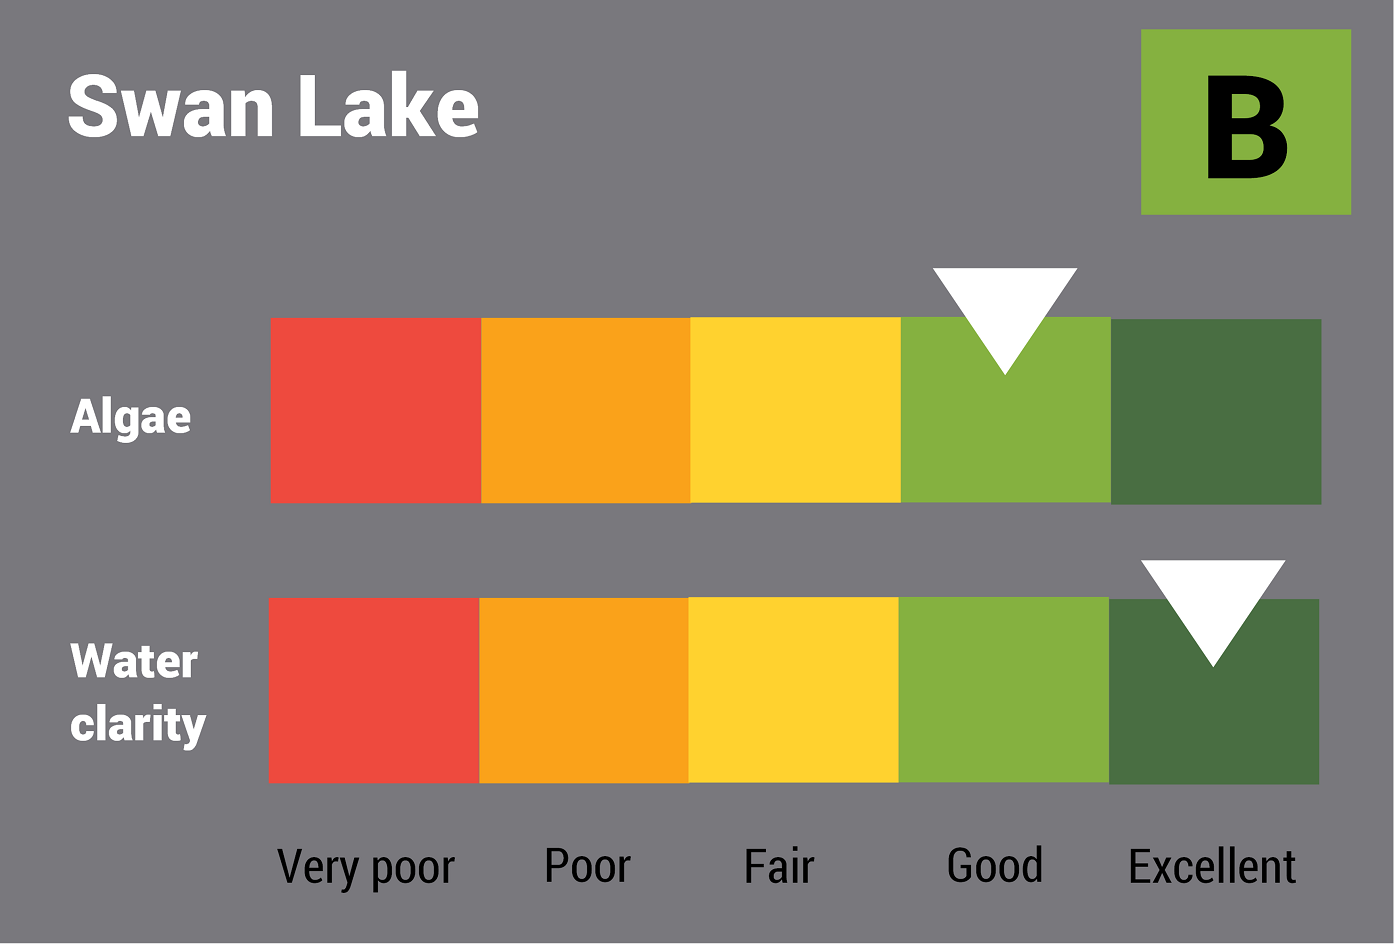 Swan Lake water quality report card for algae and water clarity showing colour-coded ratings (red, orange, yellow, light green and dark green, which represent very poor, poor, fair, good and excellent, respectively). Algae is rated 'good' and water clarity is rated 'excellent' giving an overall rating of 'good' or 'B'.